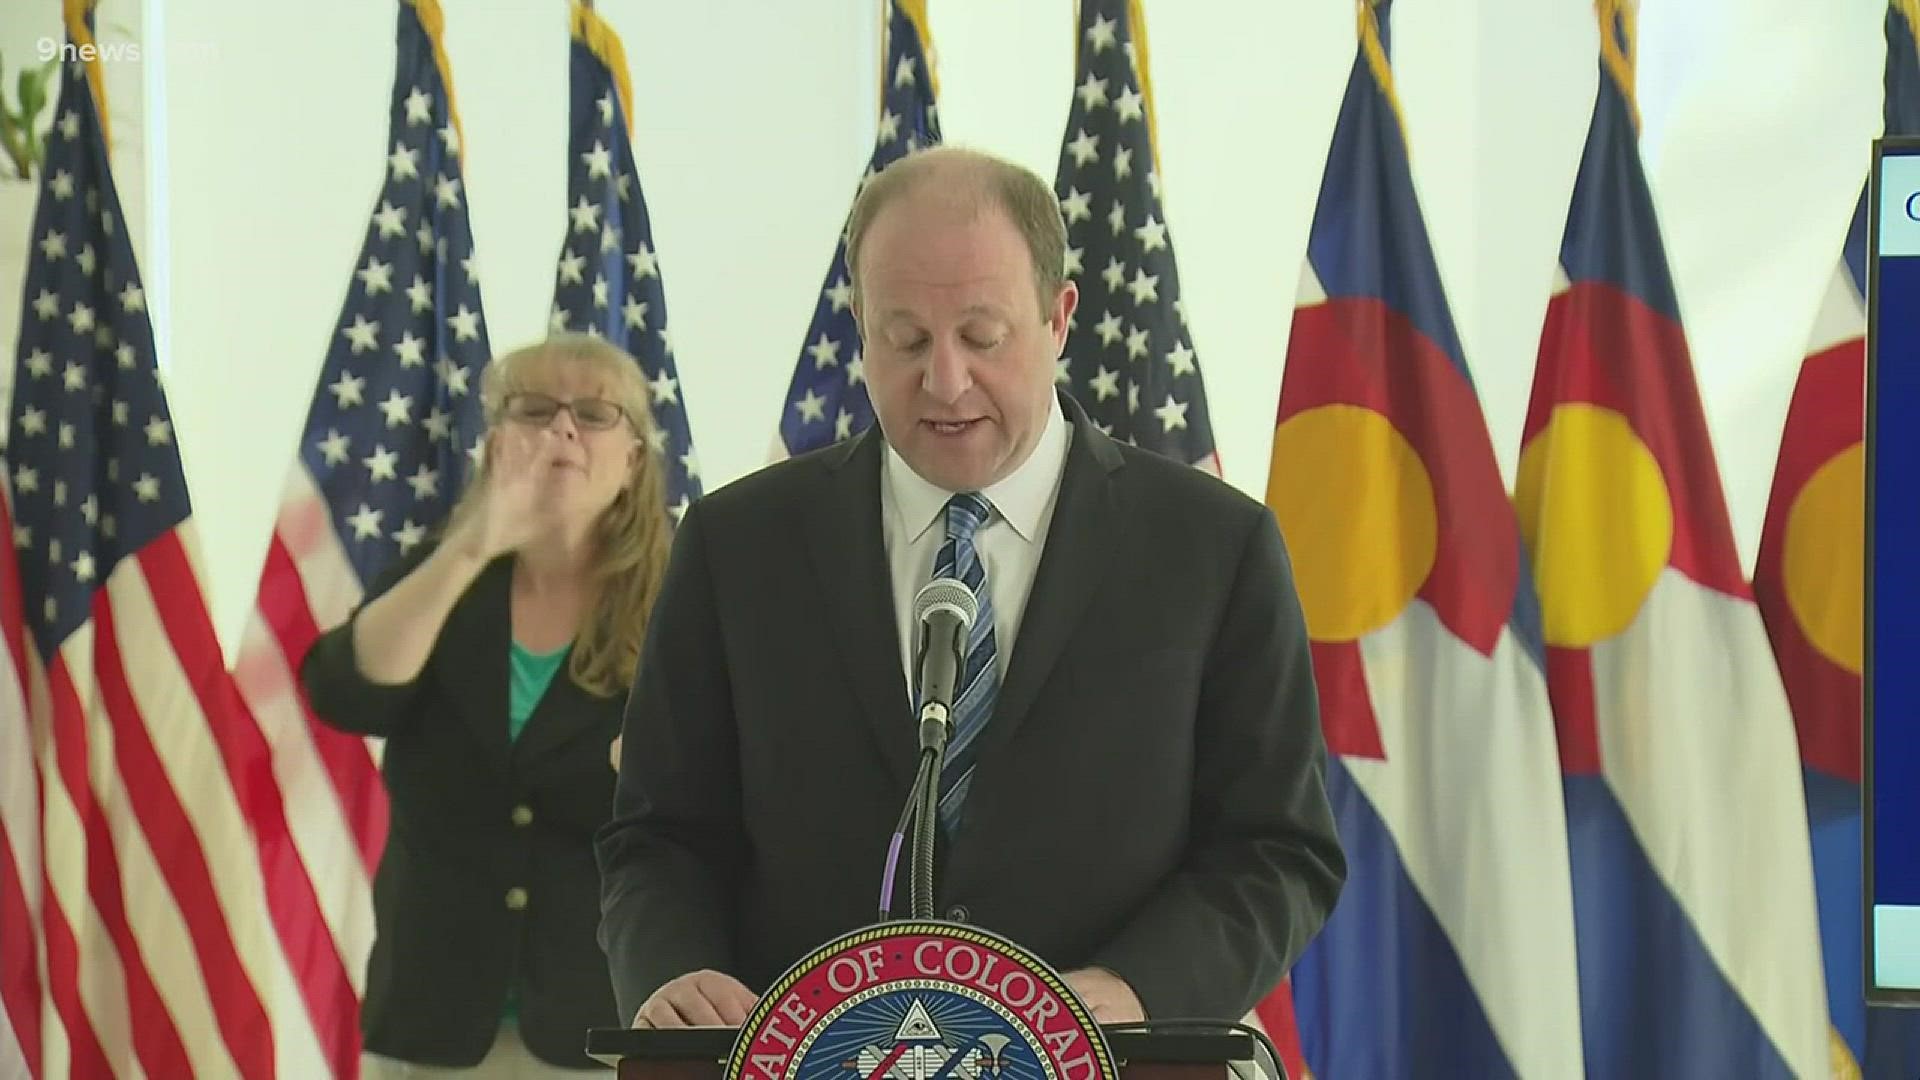 Watch Colorado governor Jared Polis' full news conference from 4/17/20.